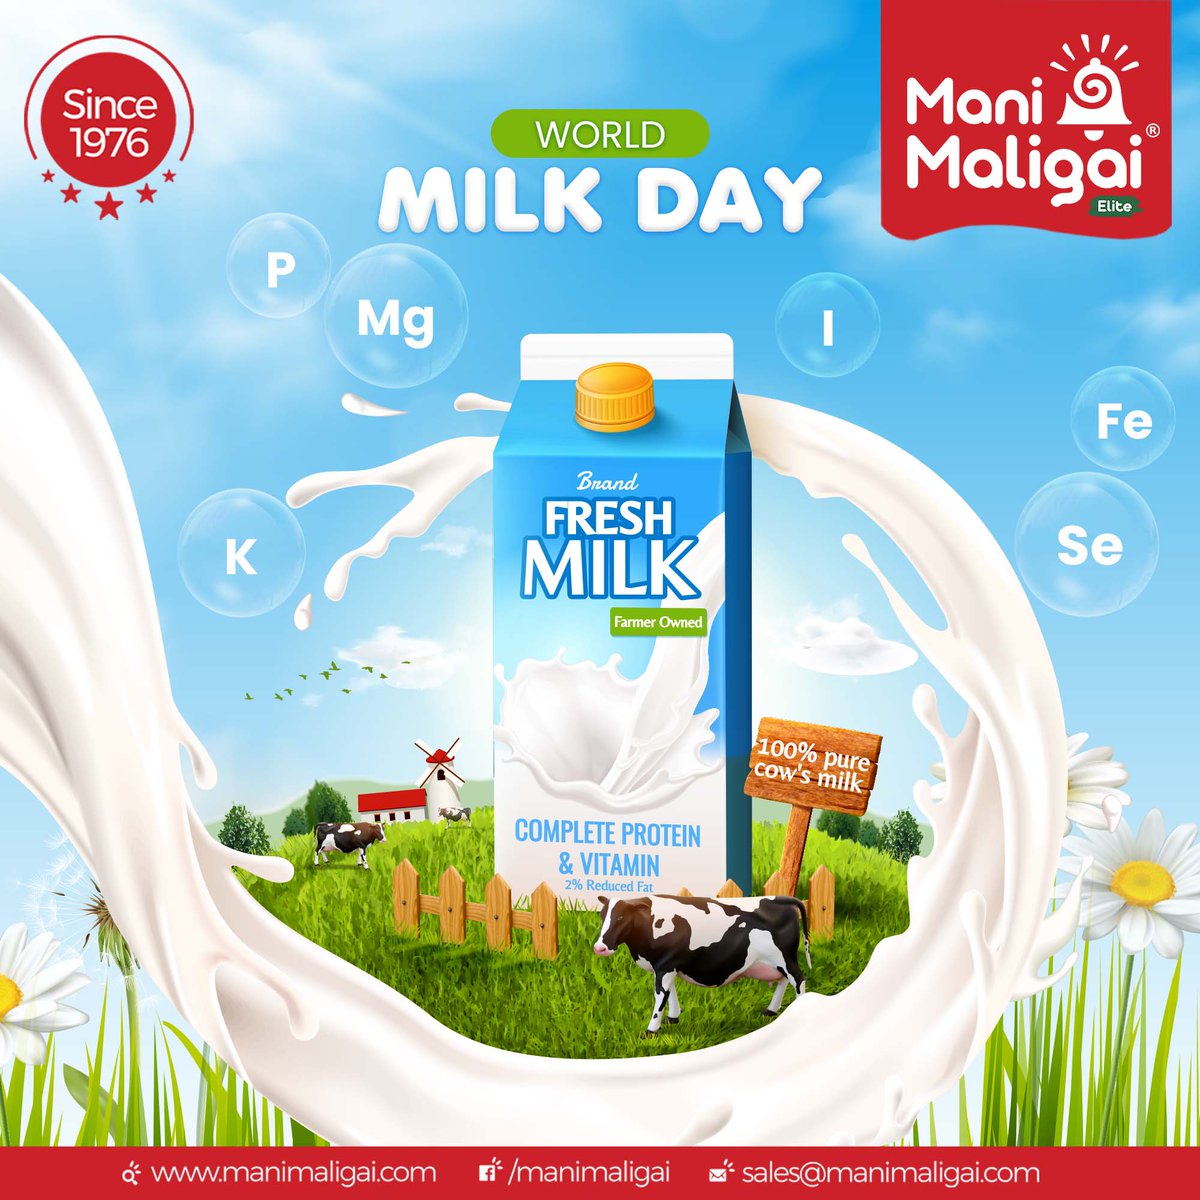 Let us begin each day with the nutrients of milk in order to be healthy and joyful. 

Wish you a very Happy World Milk Day.

#Manimaligai #Pollachi #Groceryshop #Supermarket #Manimaligaisupermarket #WorldMilkDay #NutritionalPowerhouse #DairyDelights #SupportFarmer #Milk #Dairy